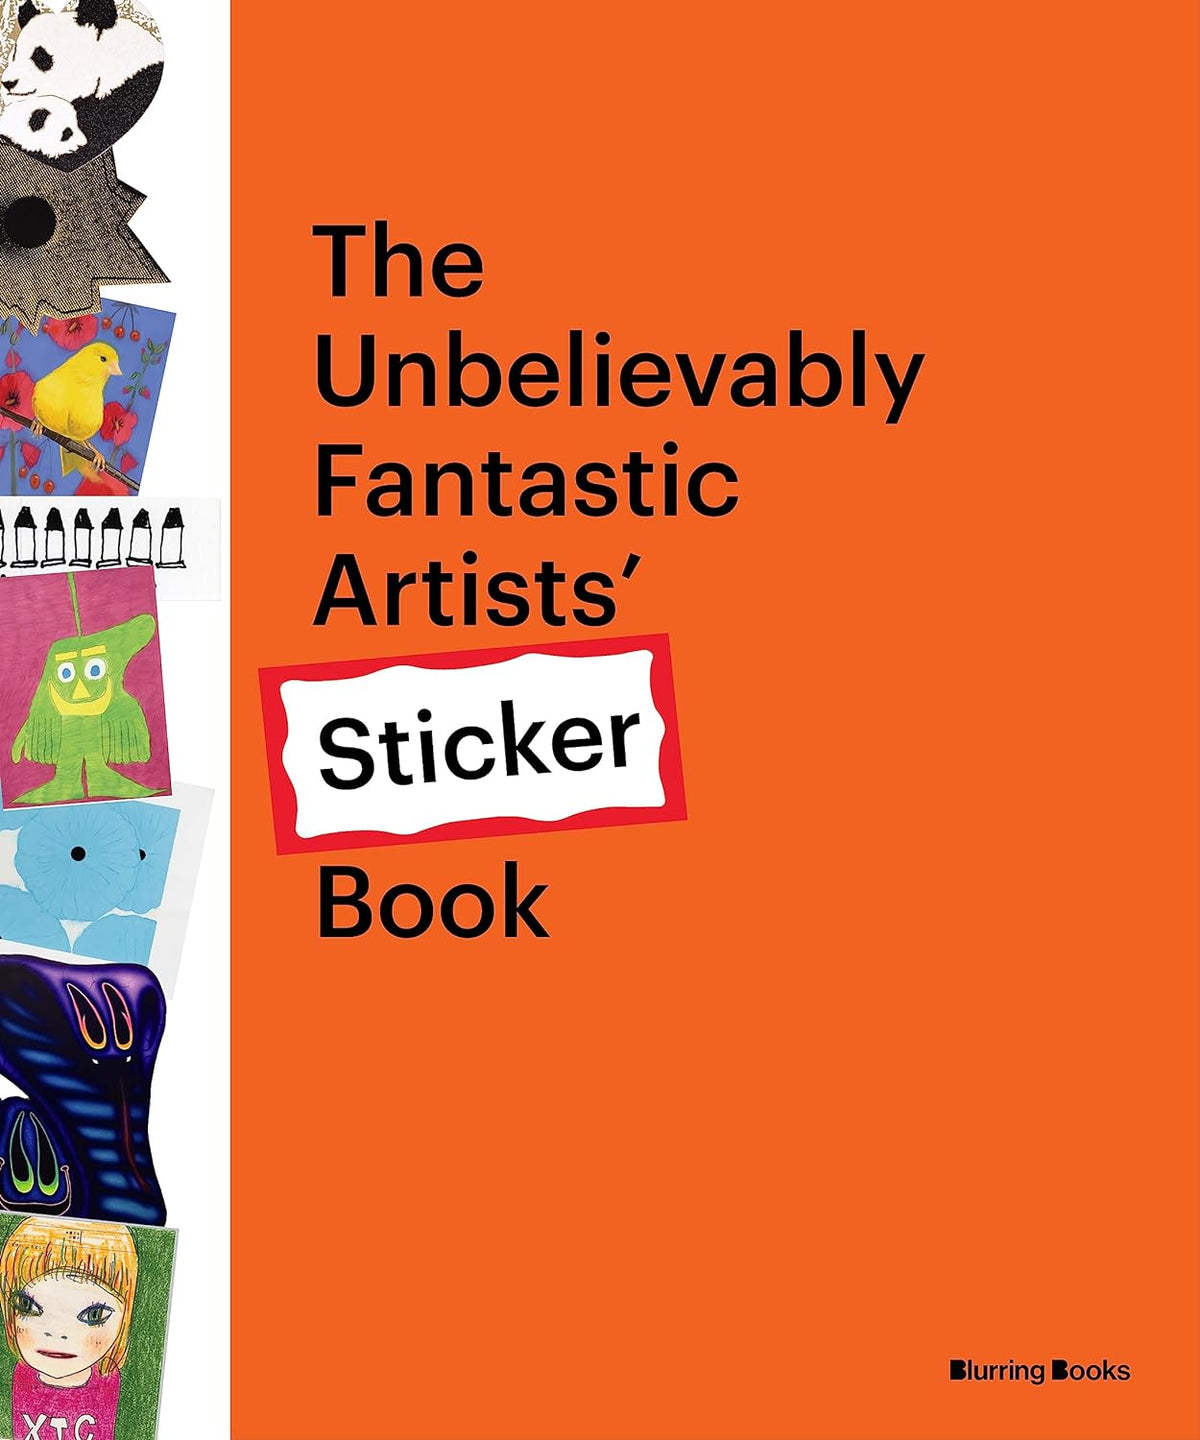 The Unbelievably Fantastic Artists’ Sticker Book